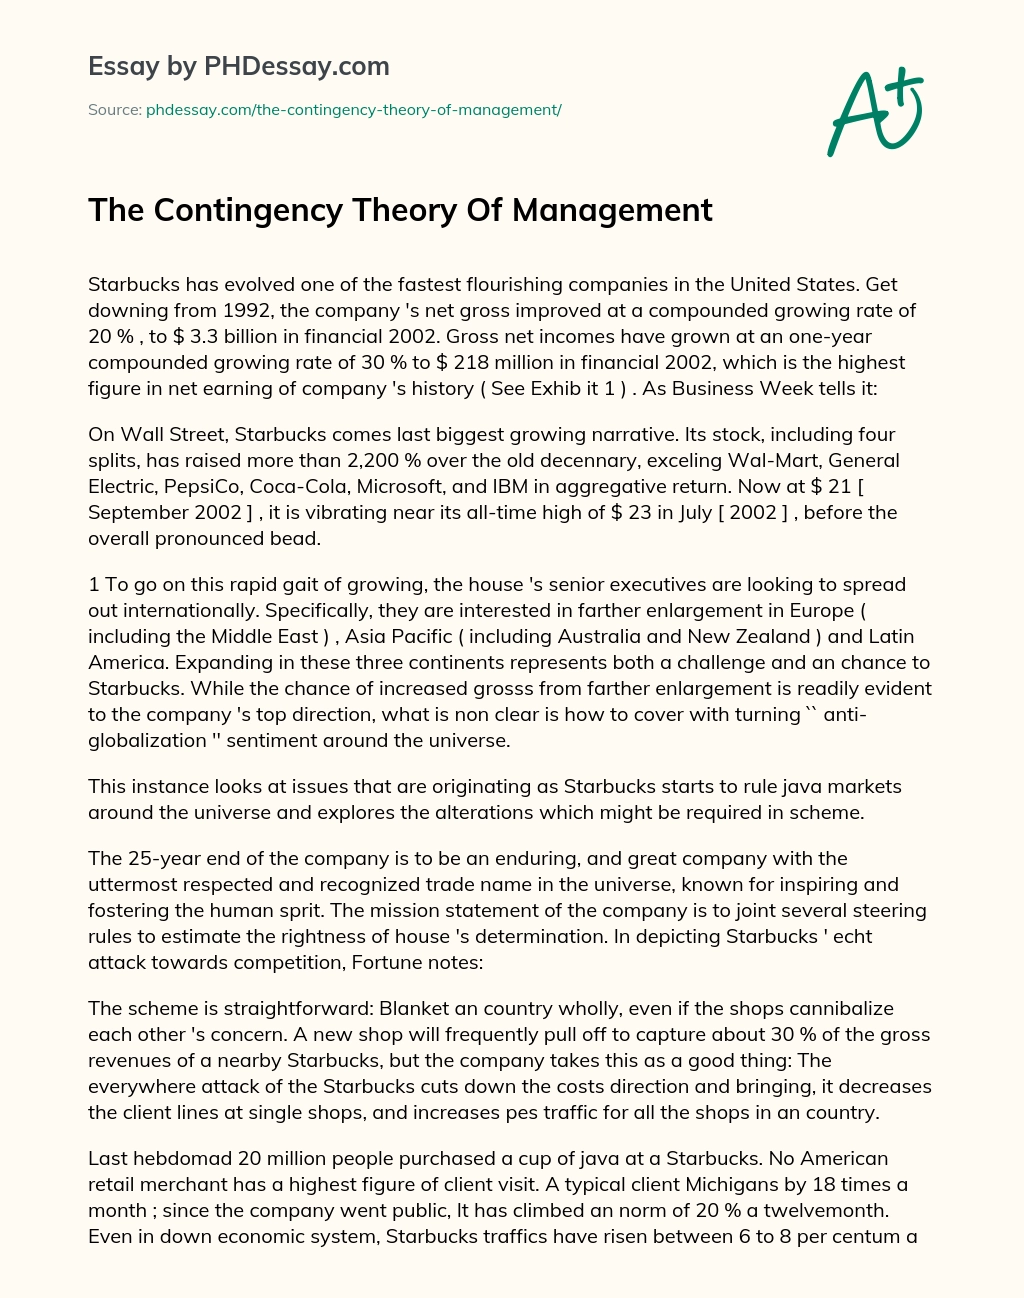 The Contingency Theory Of Management essay